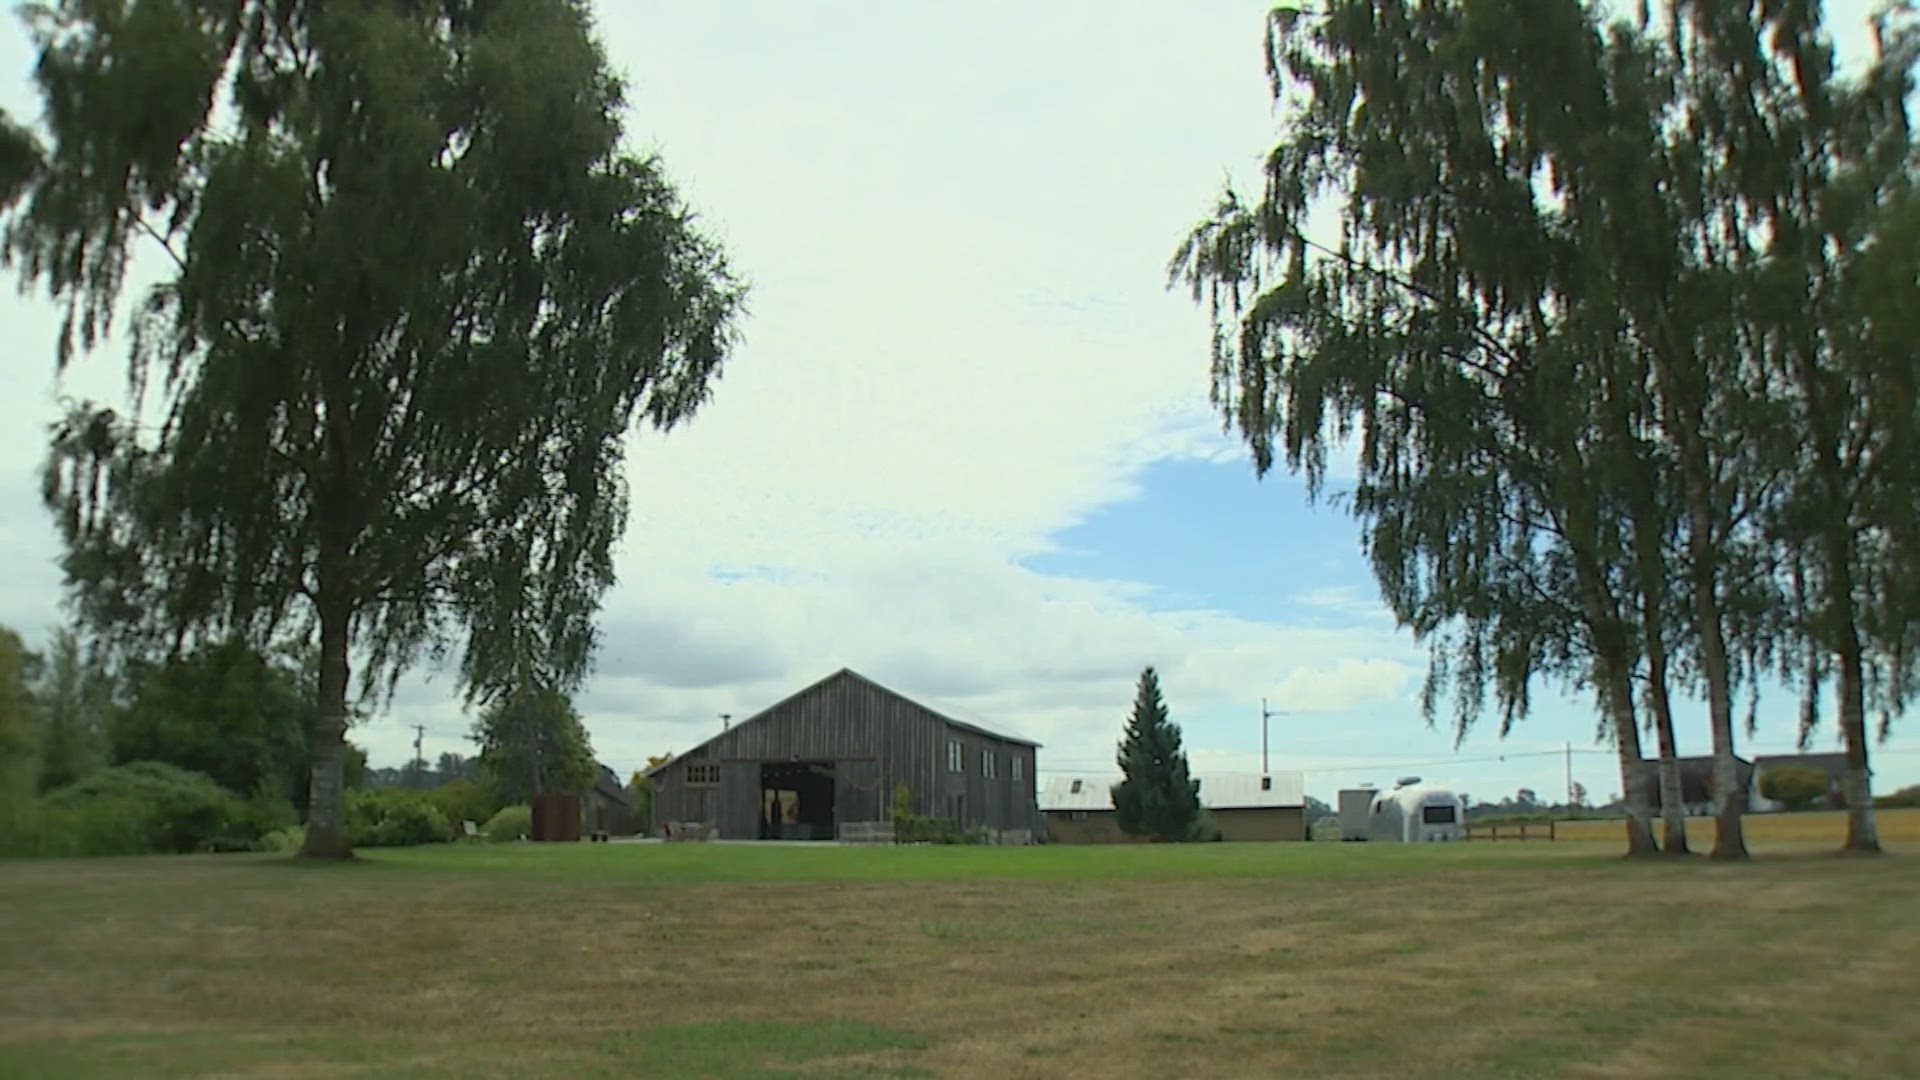 A proposed ordinance could ban "celebratory gatherings" on agricultural land.